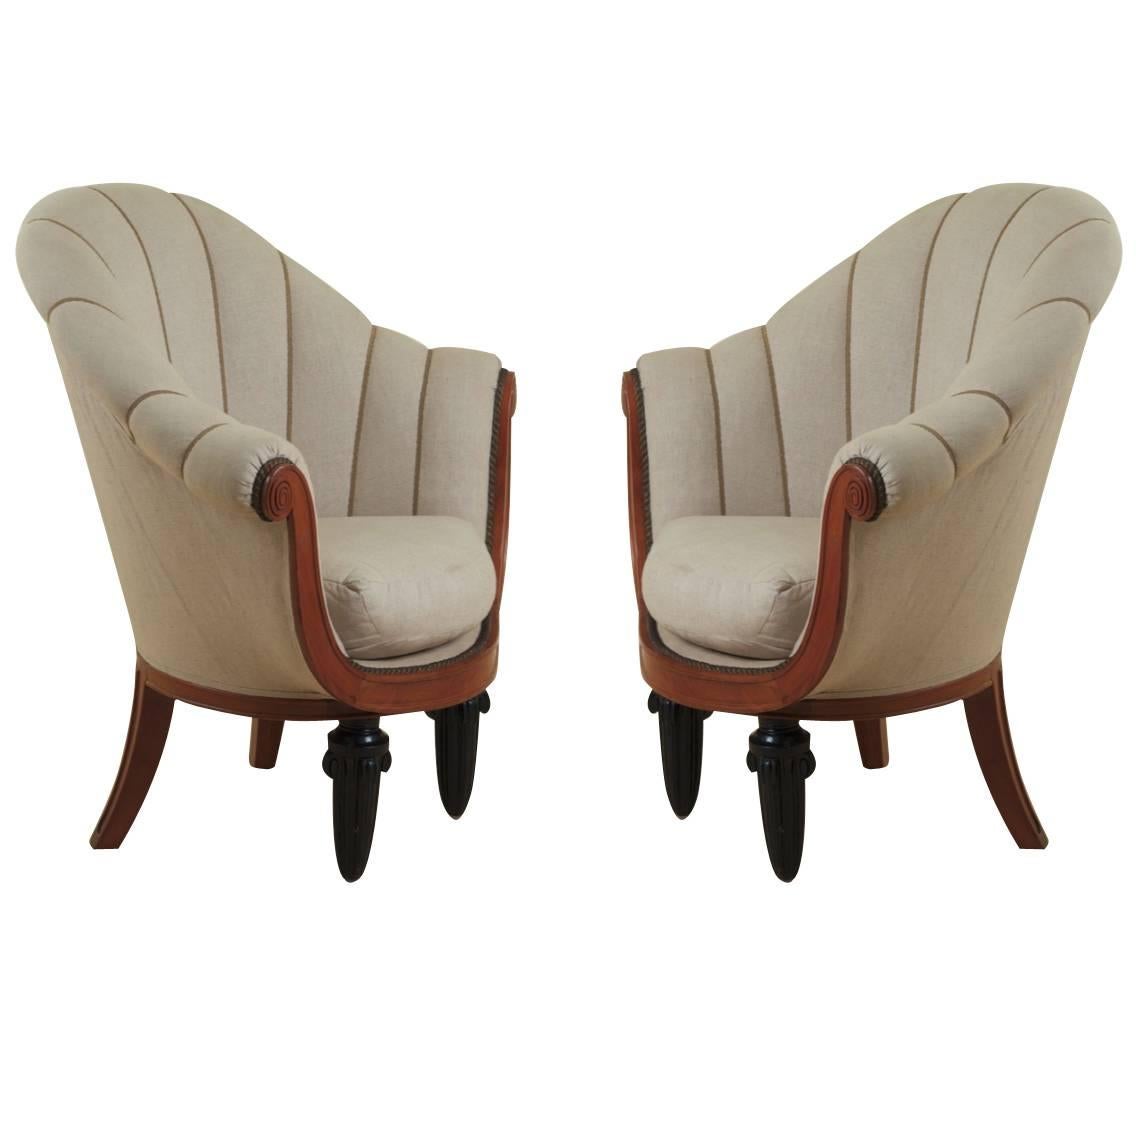 Maurice Dufrène Pair of Early Art Deco Armchairs